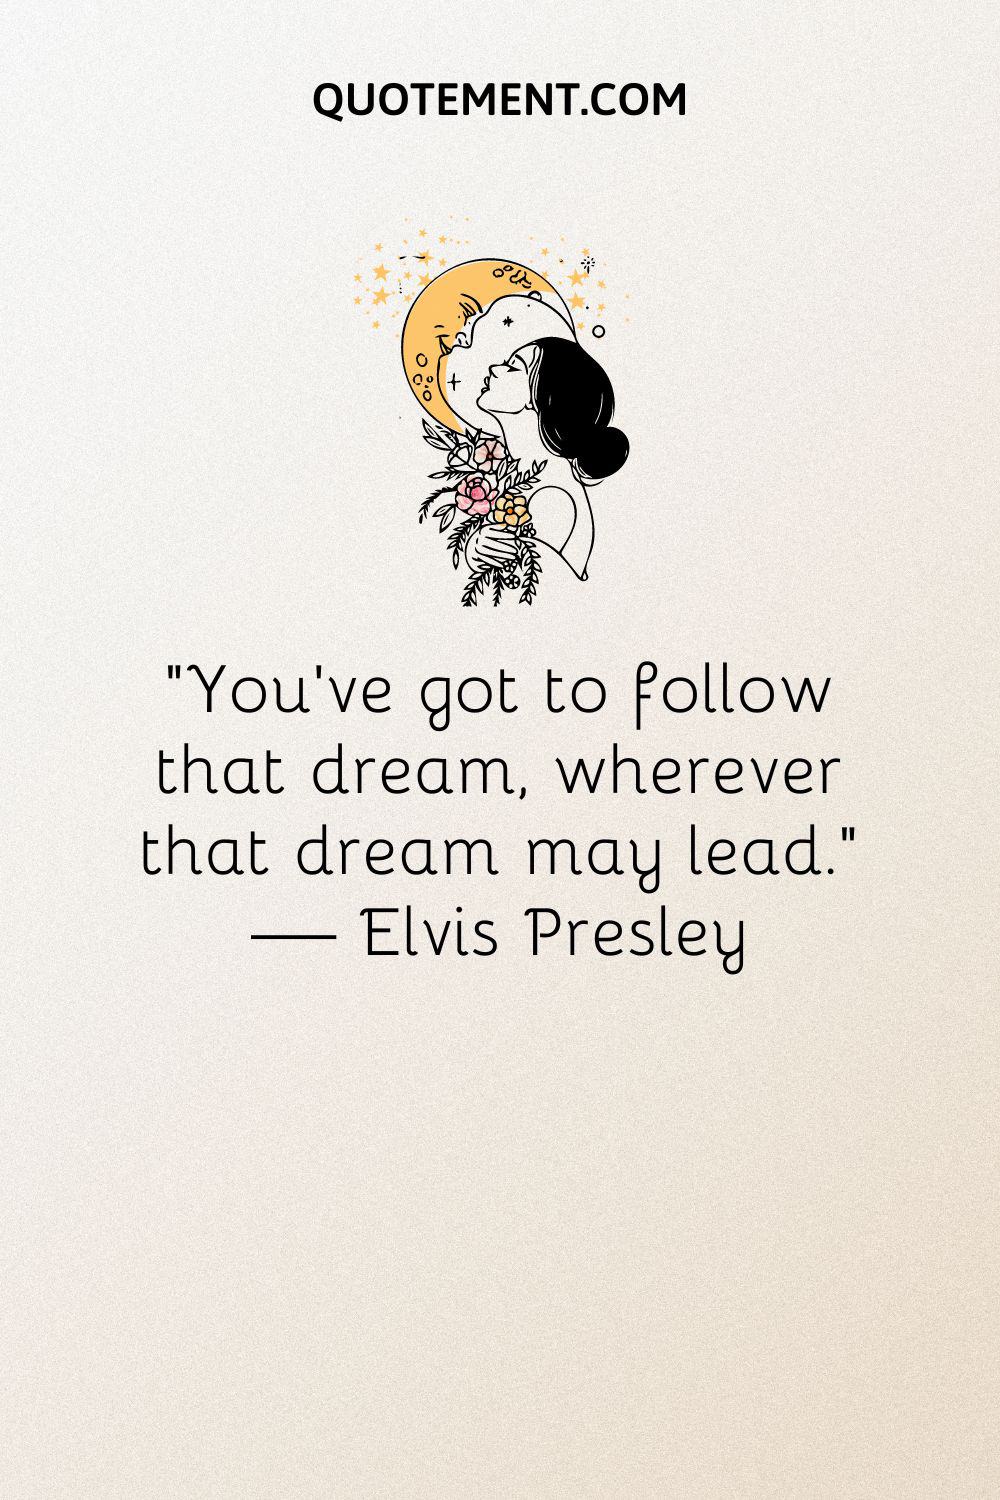 “You’ve got to follow that dream, wherever that dream may lead.” — Elvis Presley